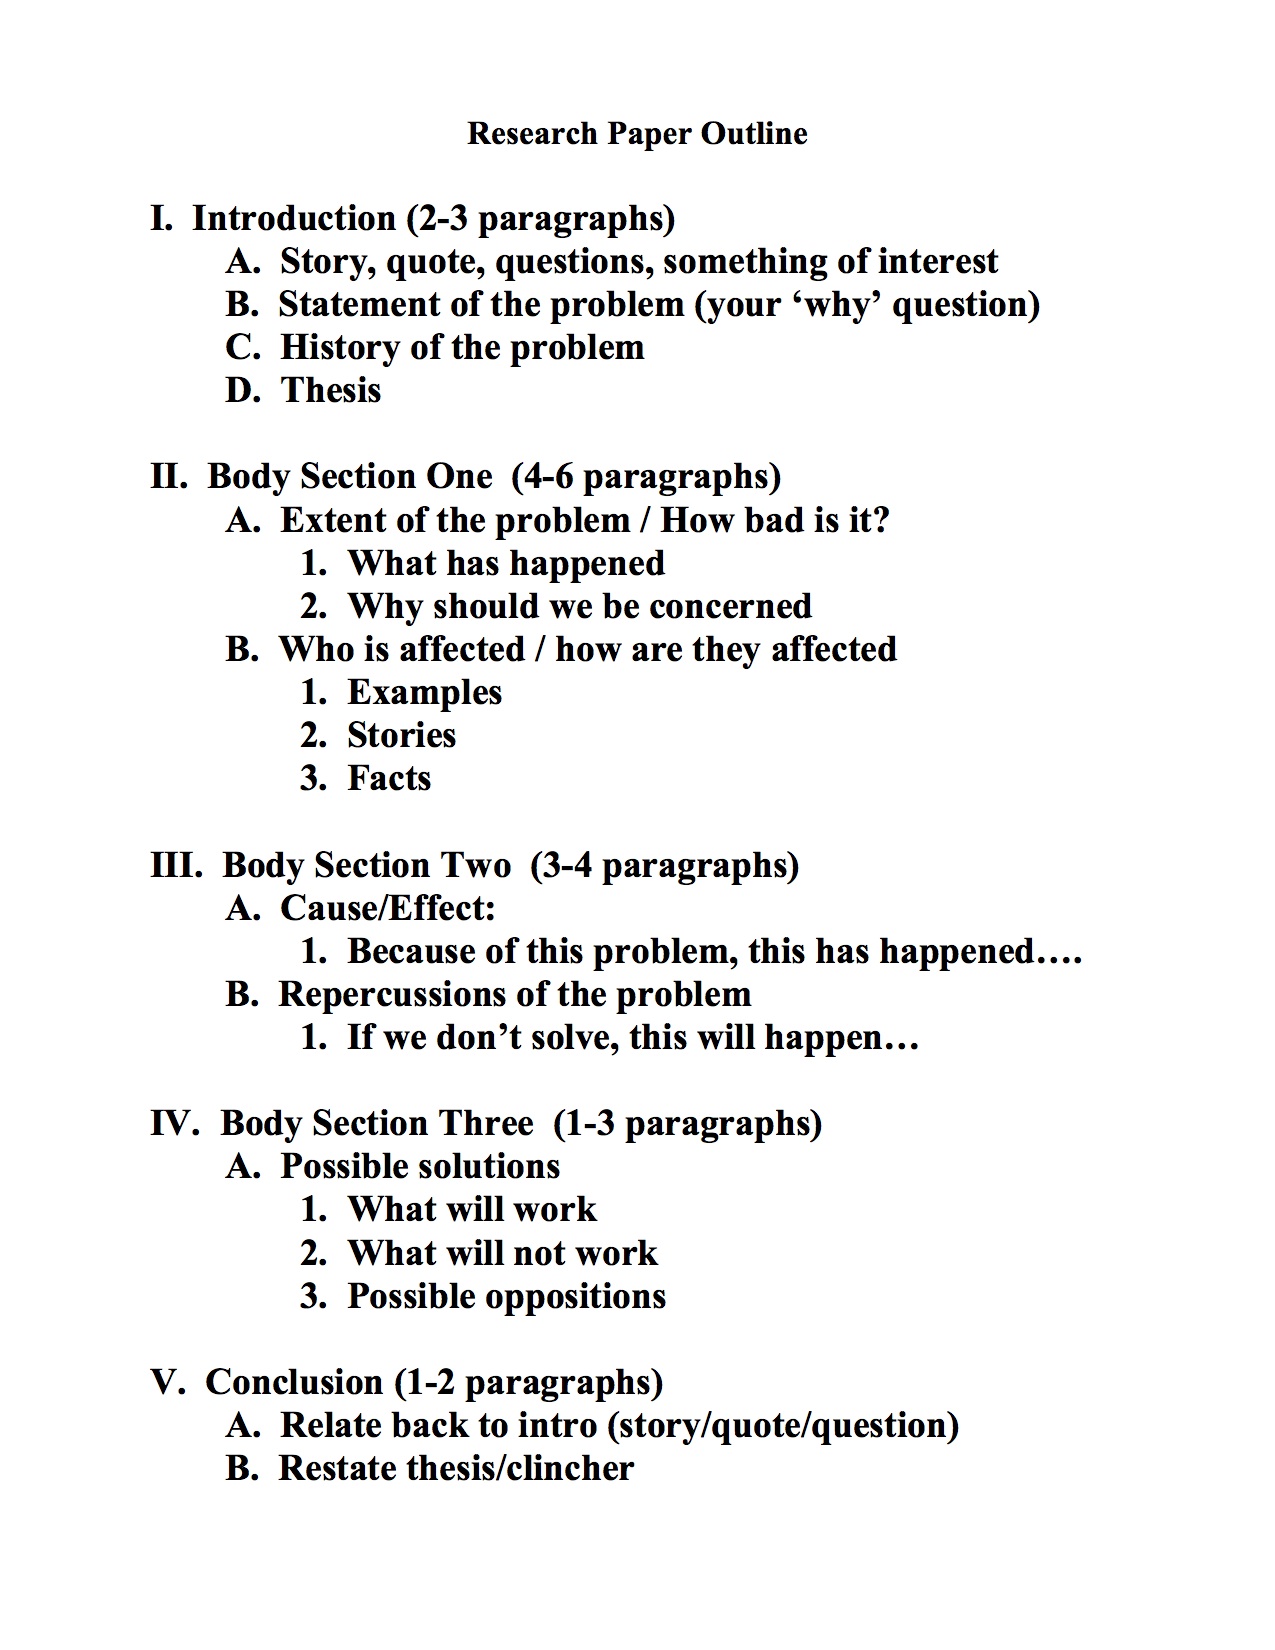 mla format outline for research paper Jose.mulinohouse.co